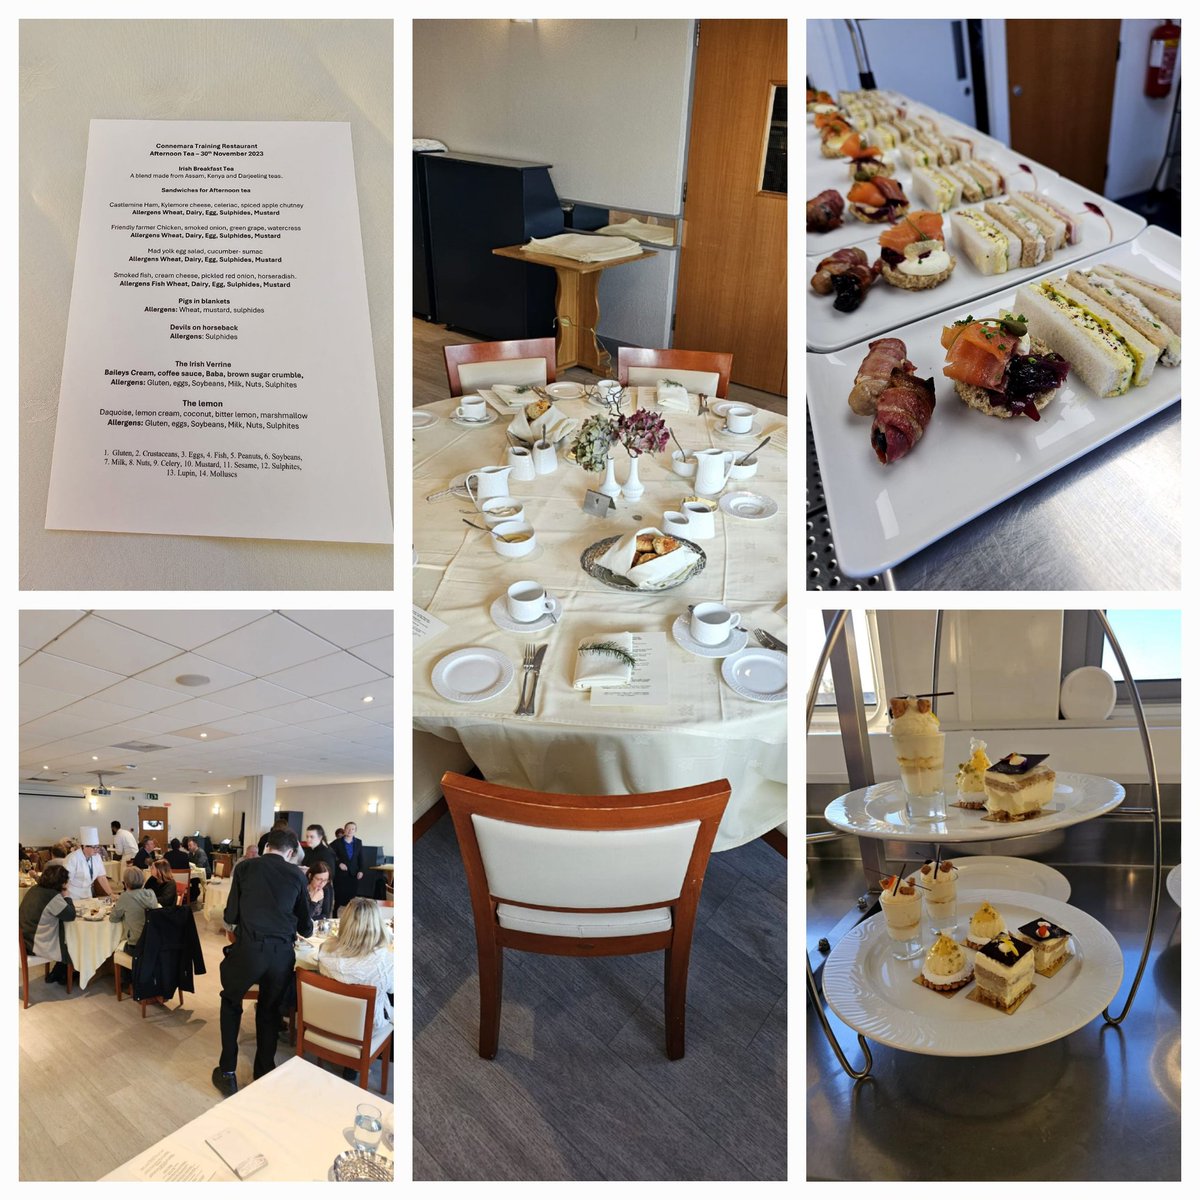 Super team work by Hotel Management year 1 and Advanced Pastry year 3 students preparing and serving Afternoon tea at Galway International Hotel School. A Hugh thank you to @0773Colin @AnneOL18 @ATU_GalwayHotel @shellglynn @Beatricecoll and to all who supported the event